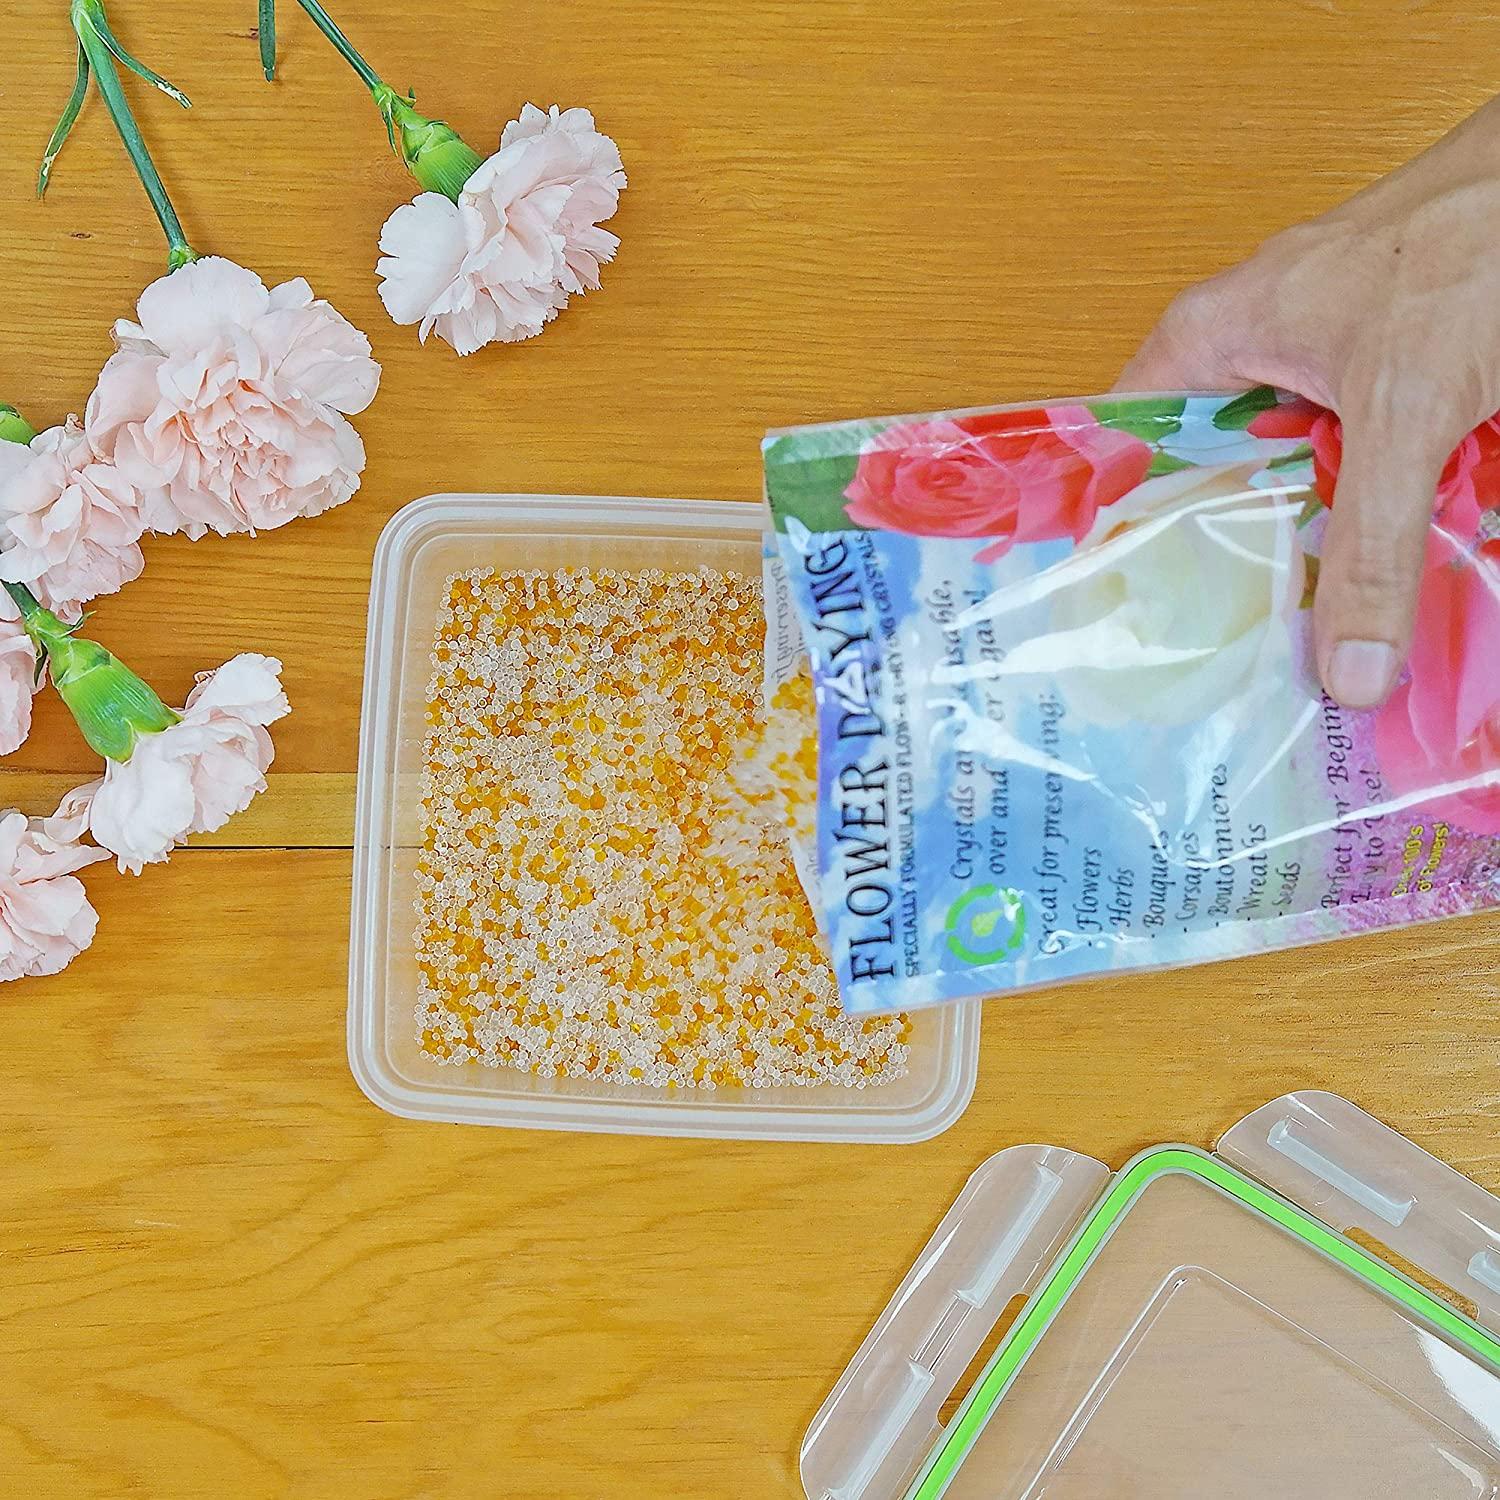 Flower Drying Crystals Silica Gel Flower Preservation Use for